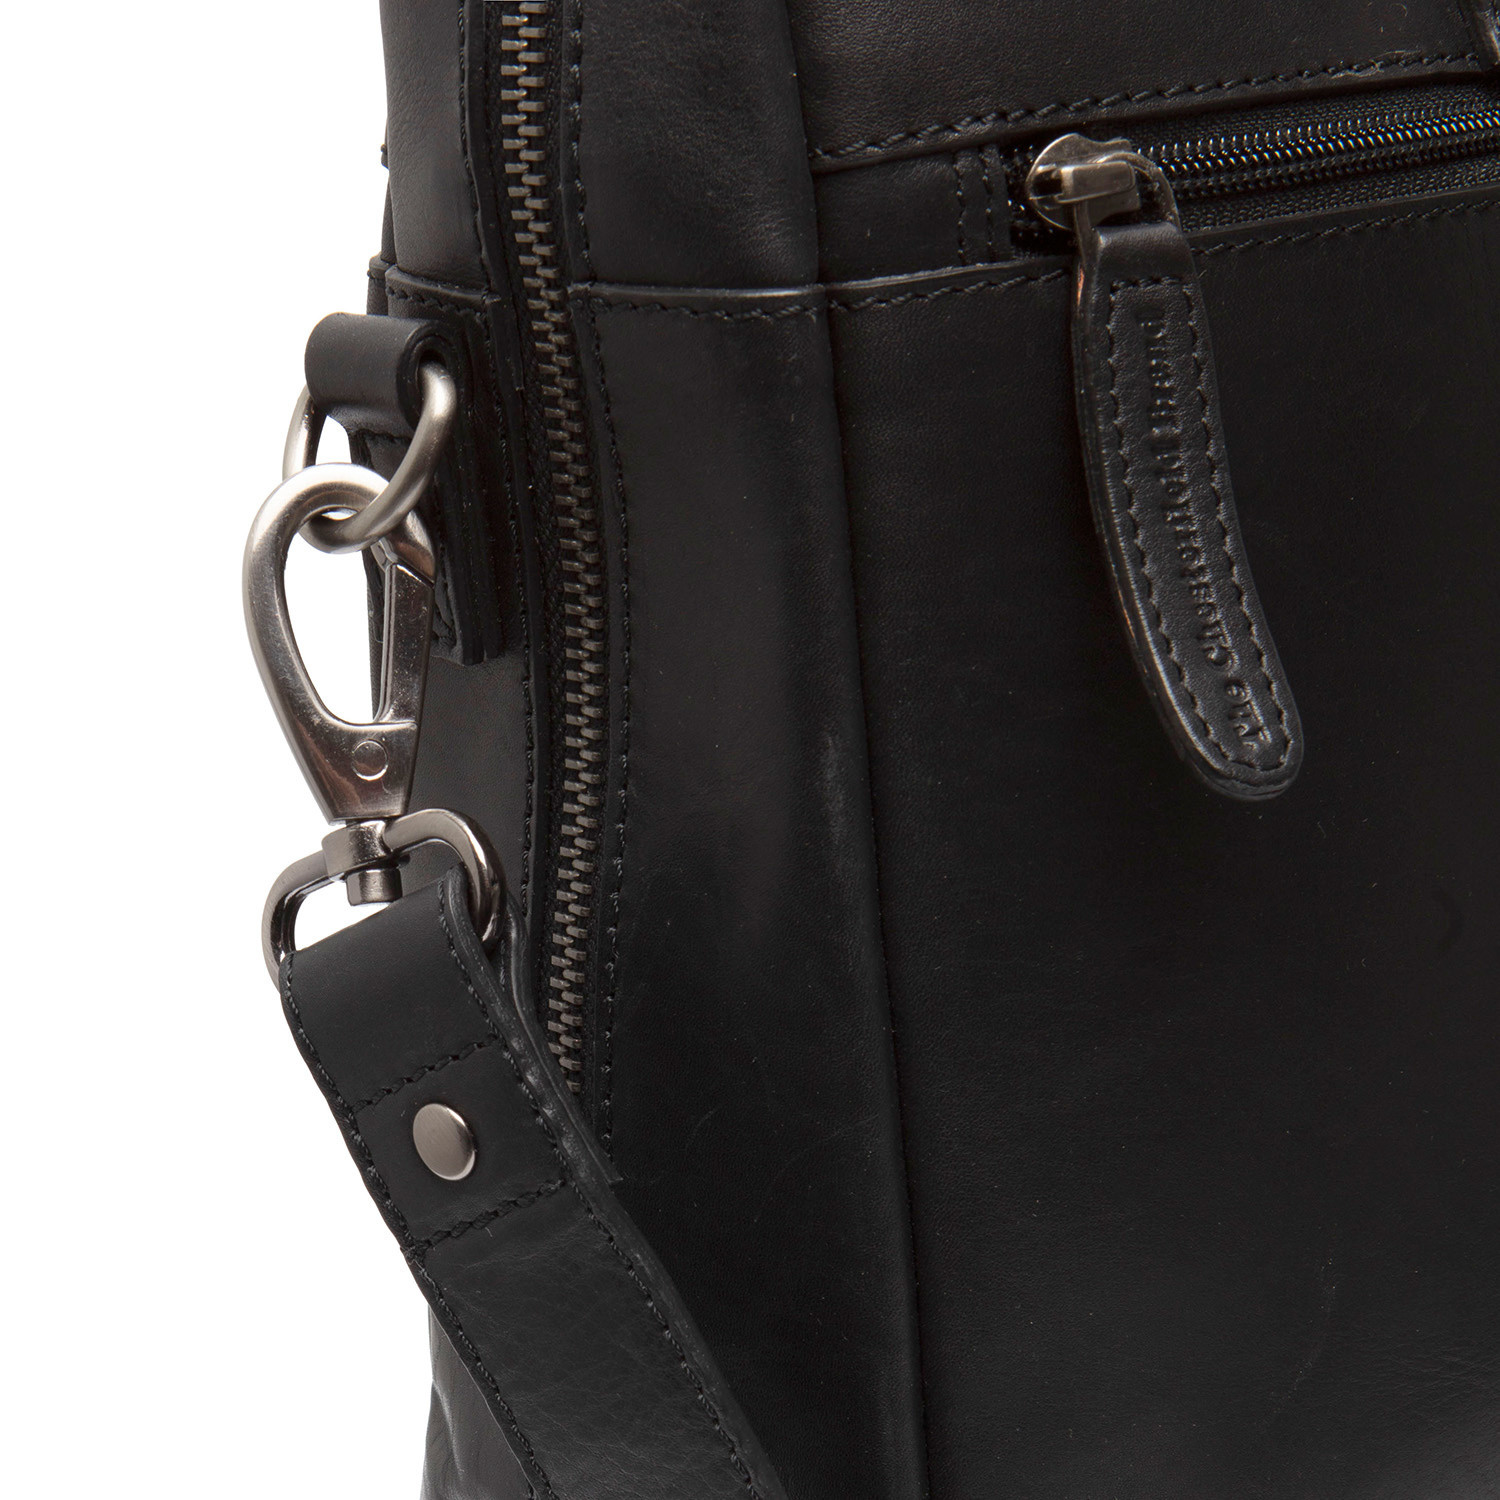 Leather Laptop Bag Black Modena - The Chesterfield Brand